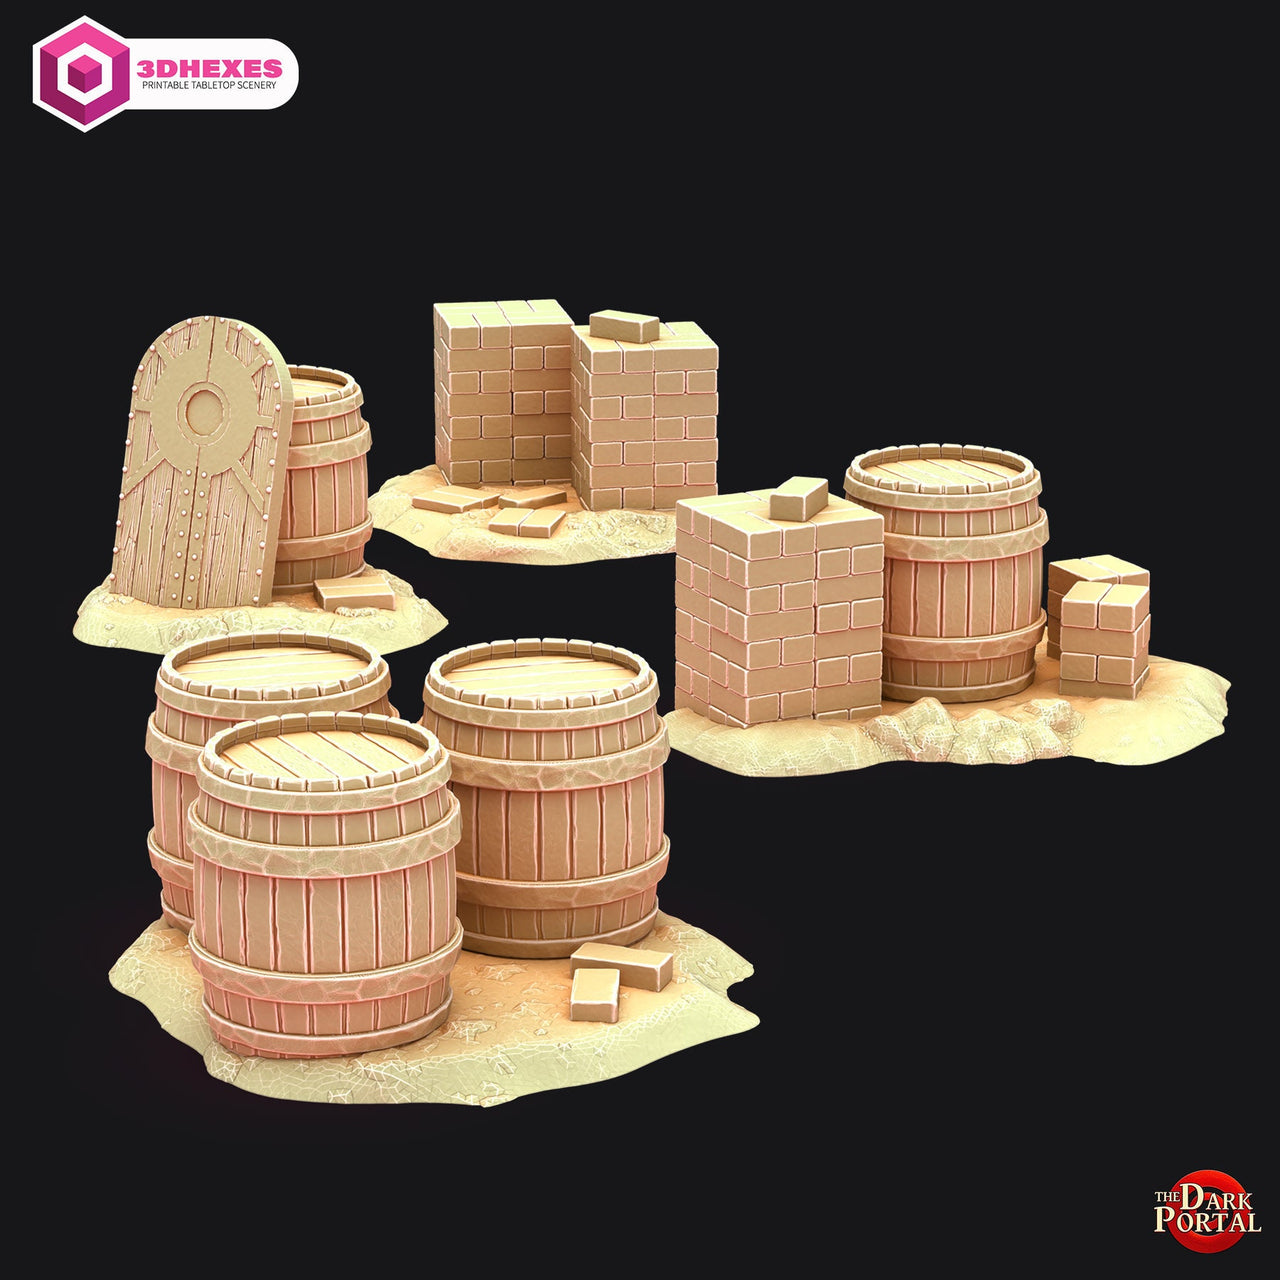 Construction Site Scatter Terrain - Echoes of the Dark Portal by 3dHexes | Ancient Ruins Terrain for Roleplaying and Gaming | Barrel | Brick